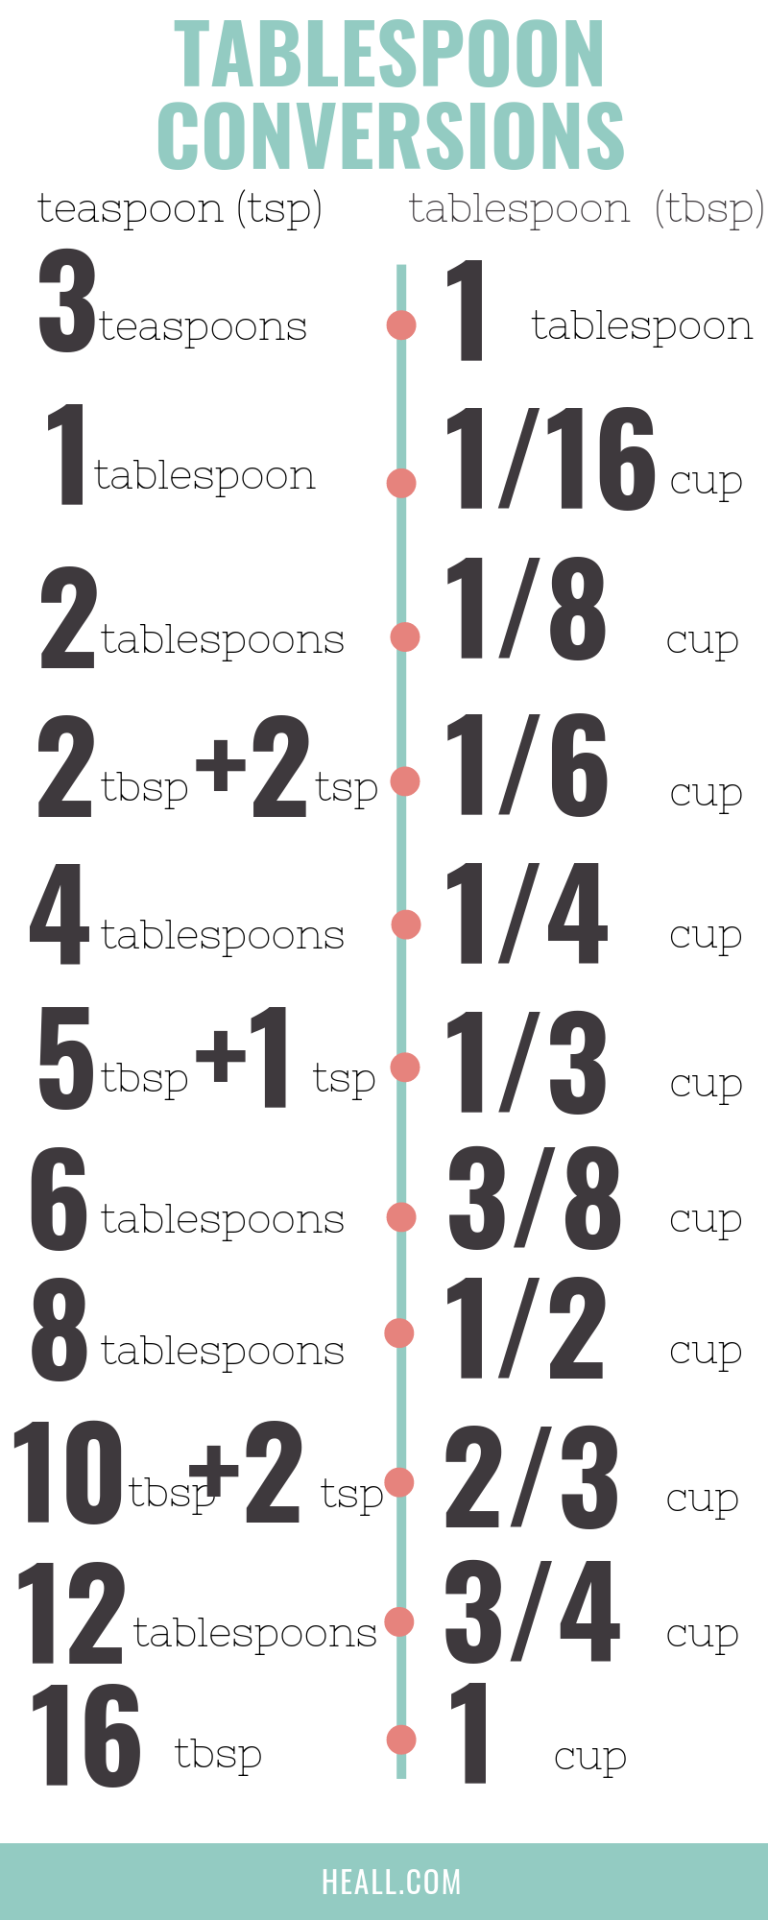 tablespoons to cups conversion